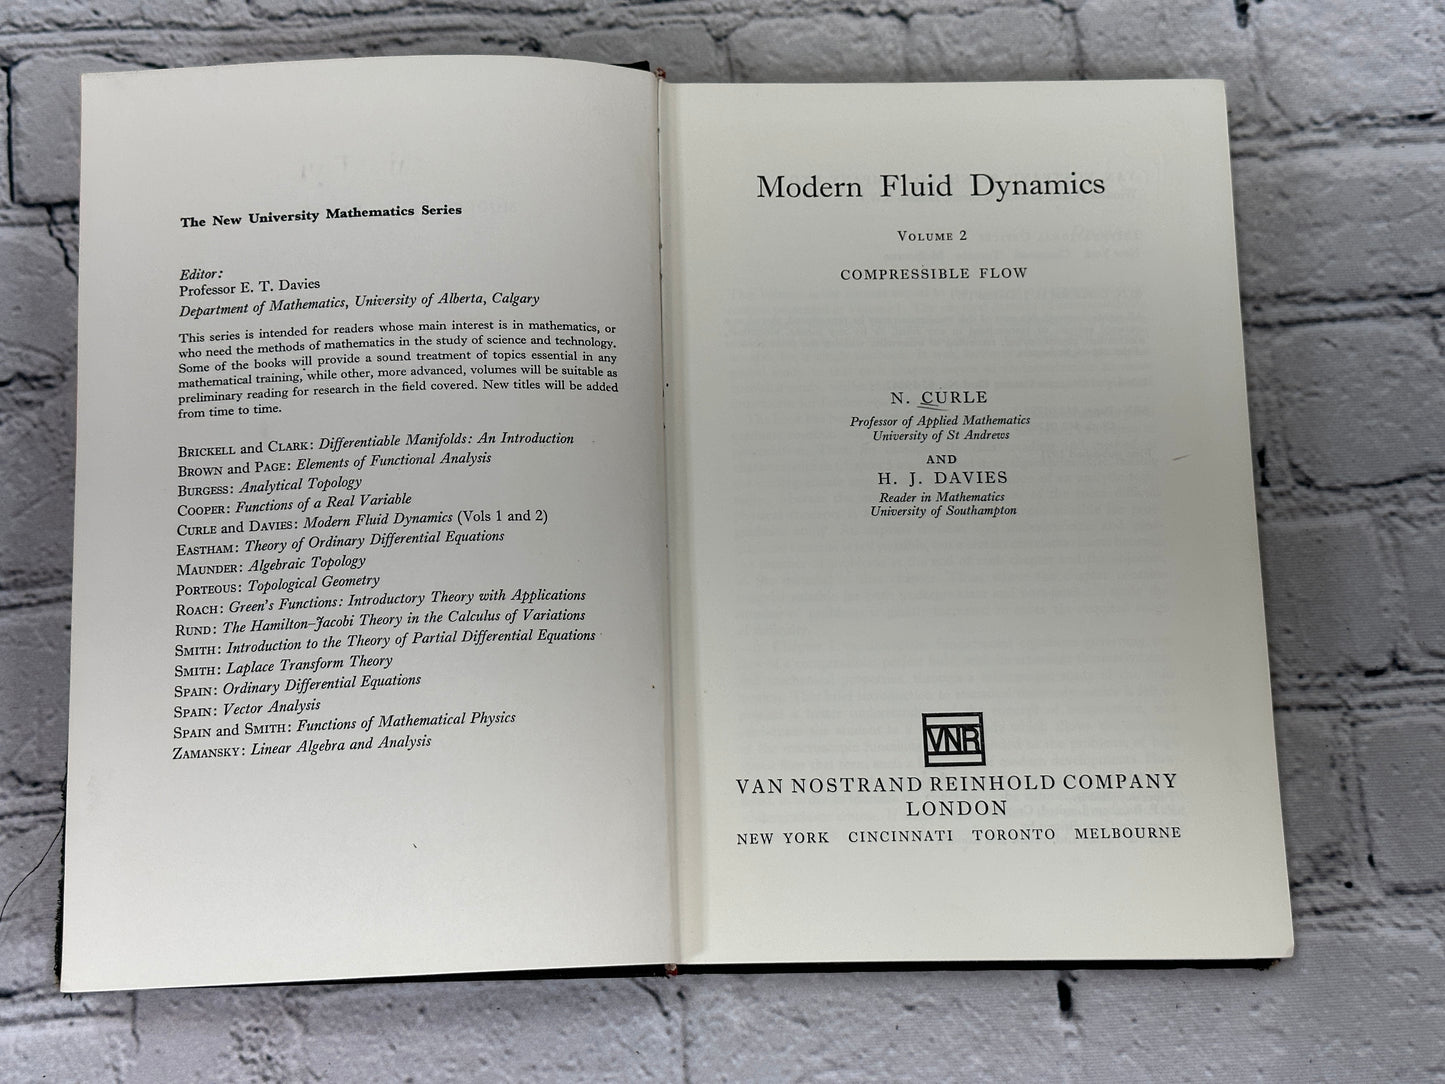 Modern Fluid Dynamics Volume II: Compressible Flow by Curle & Davies [1971]